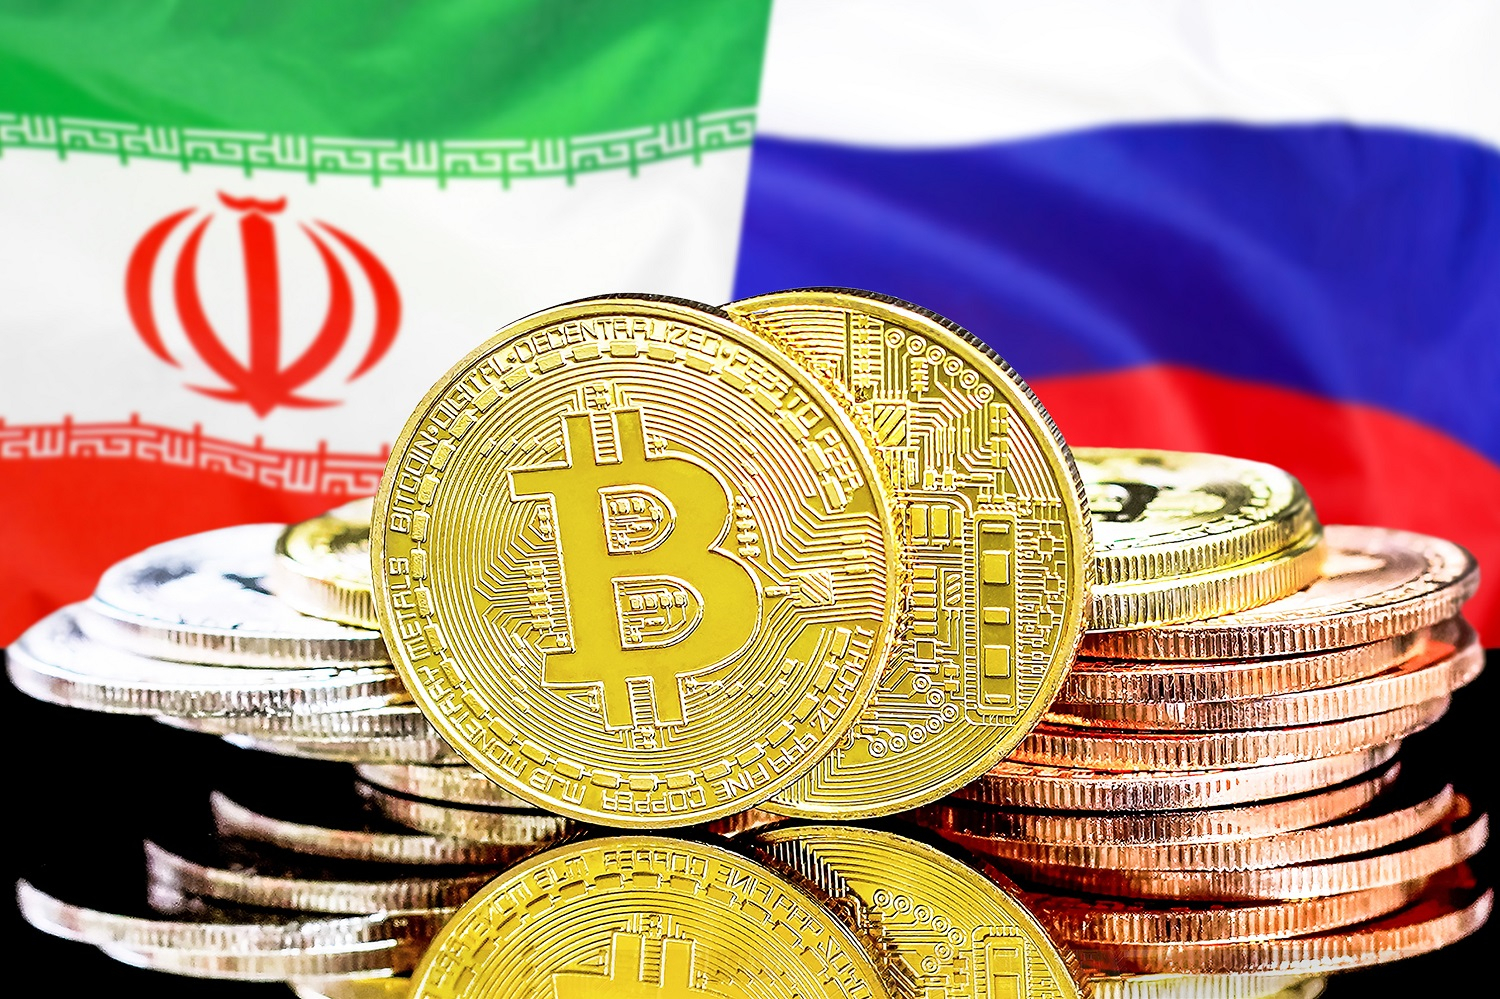 A pile of metal coins intended to represent Bitcoin tokens against the background of the flags of Iran and Russia.